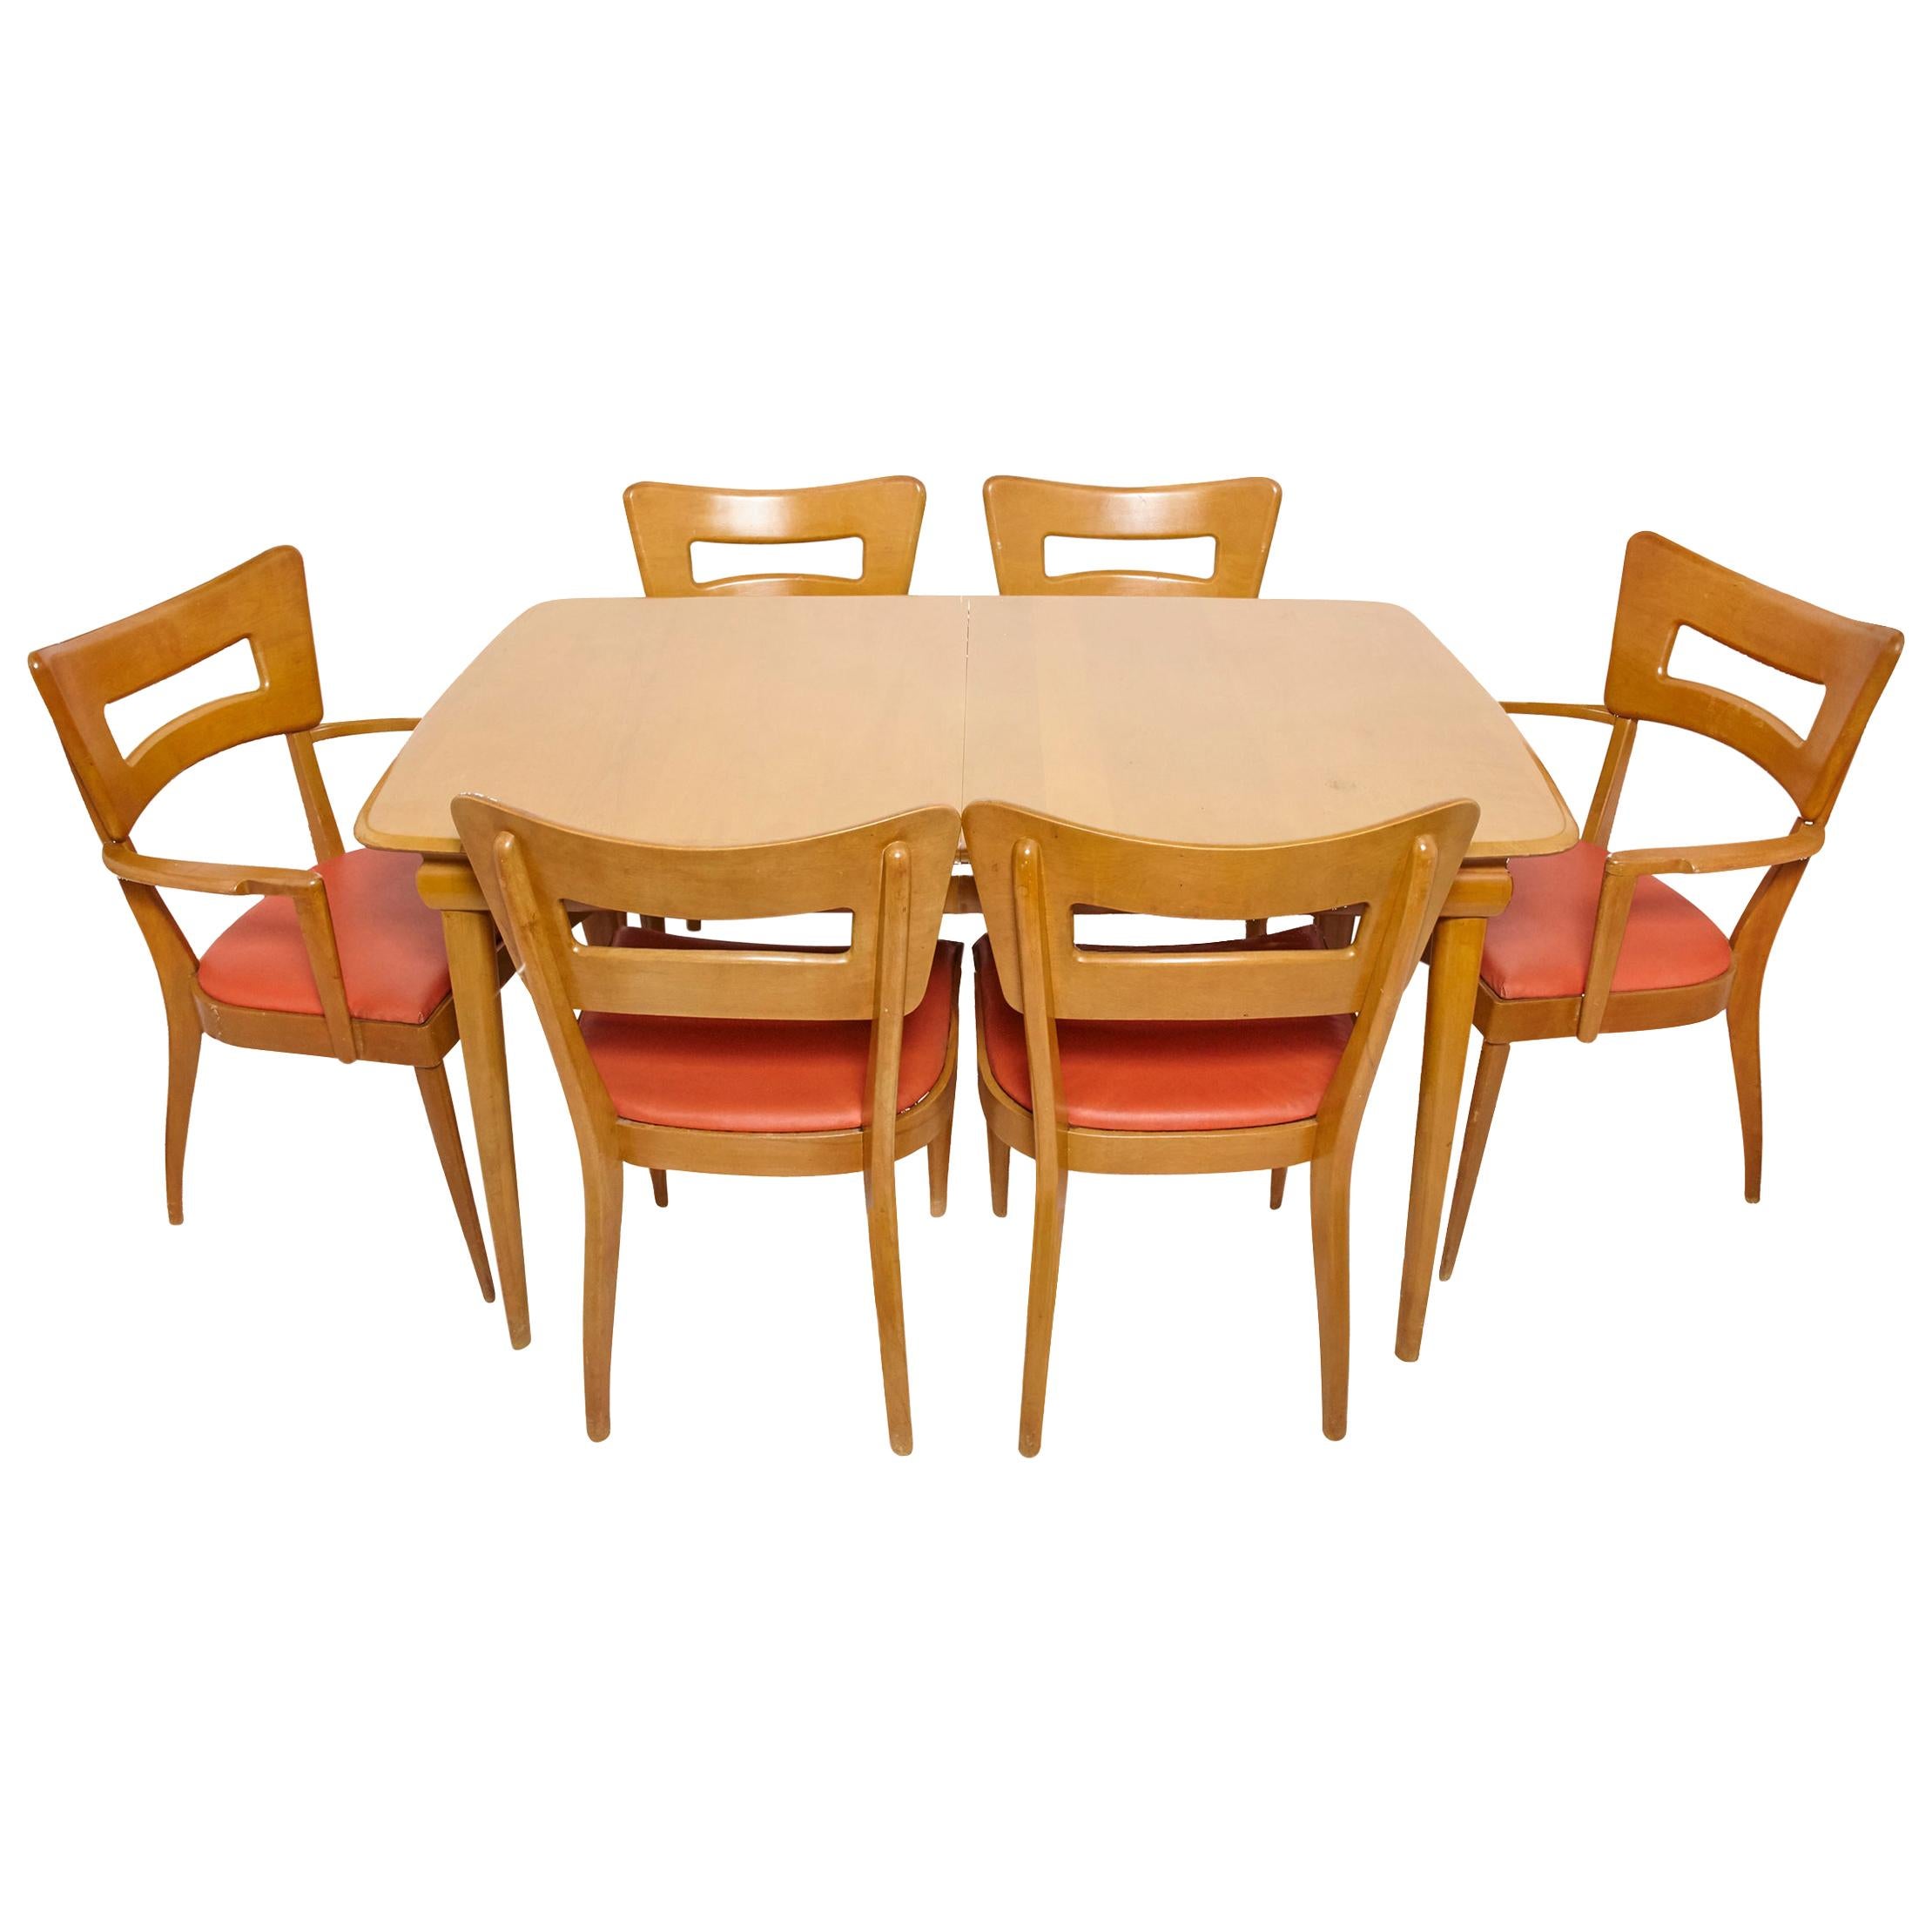 Heywood Wakefield Mid-Century Modern Extension Dining Table, 6 Dogbone Chairs